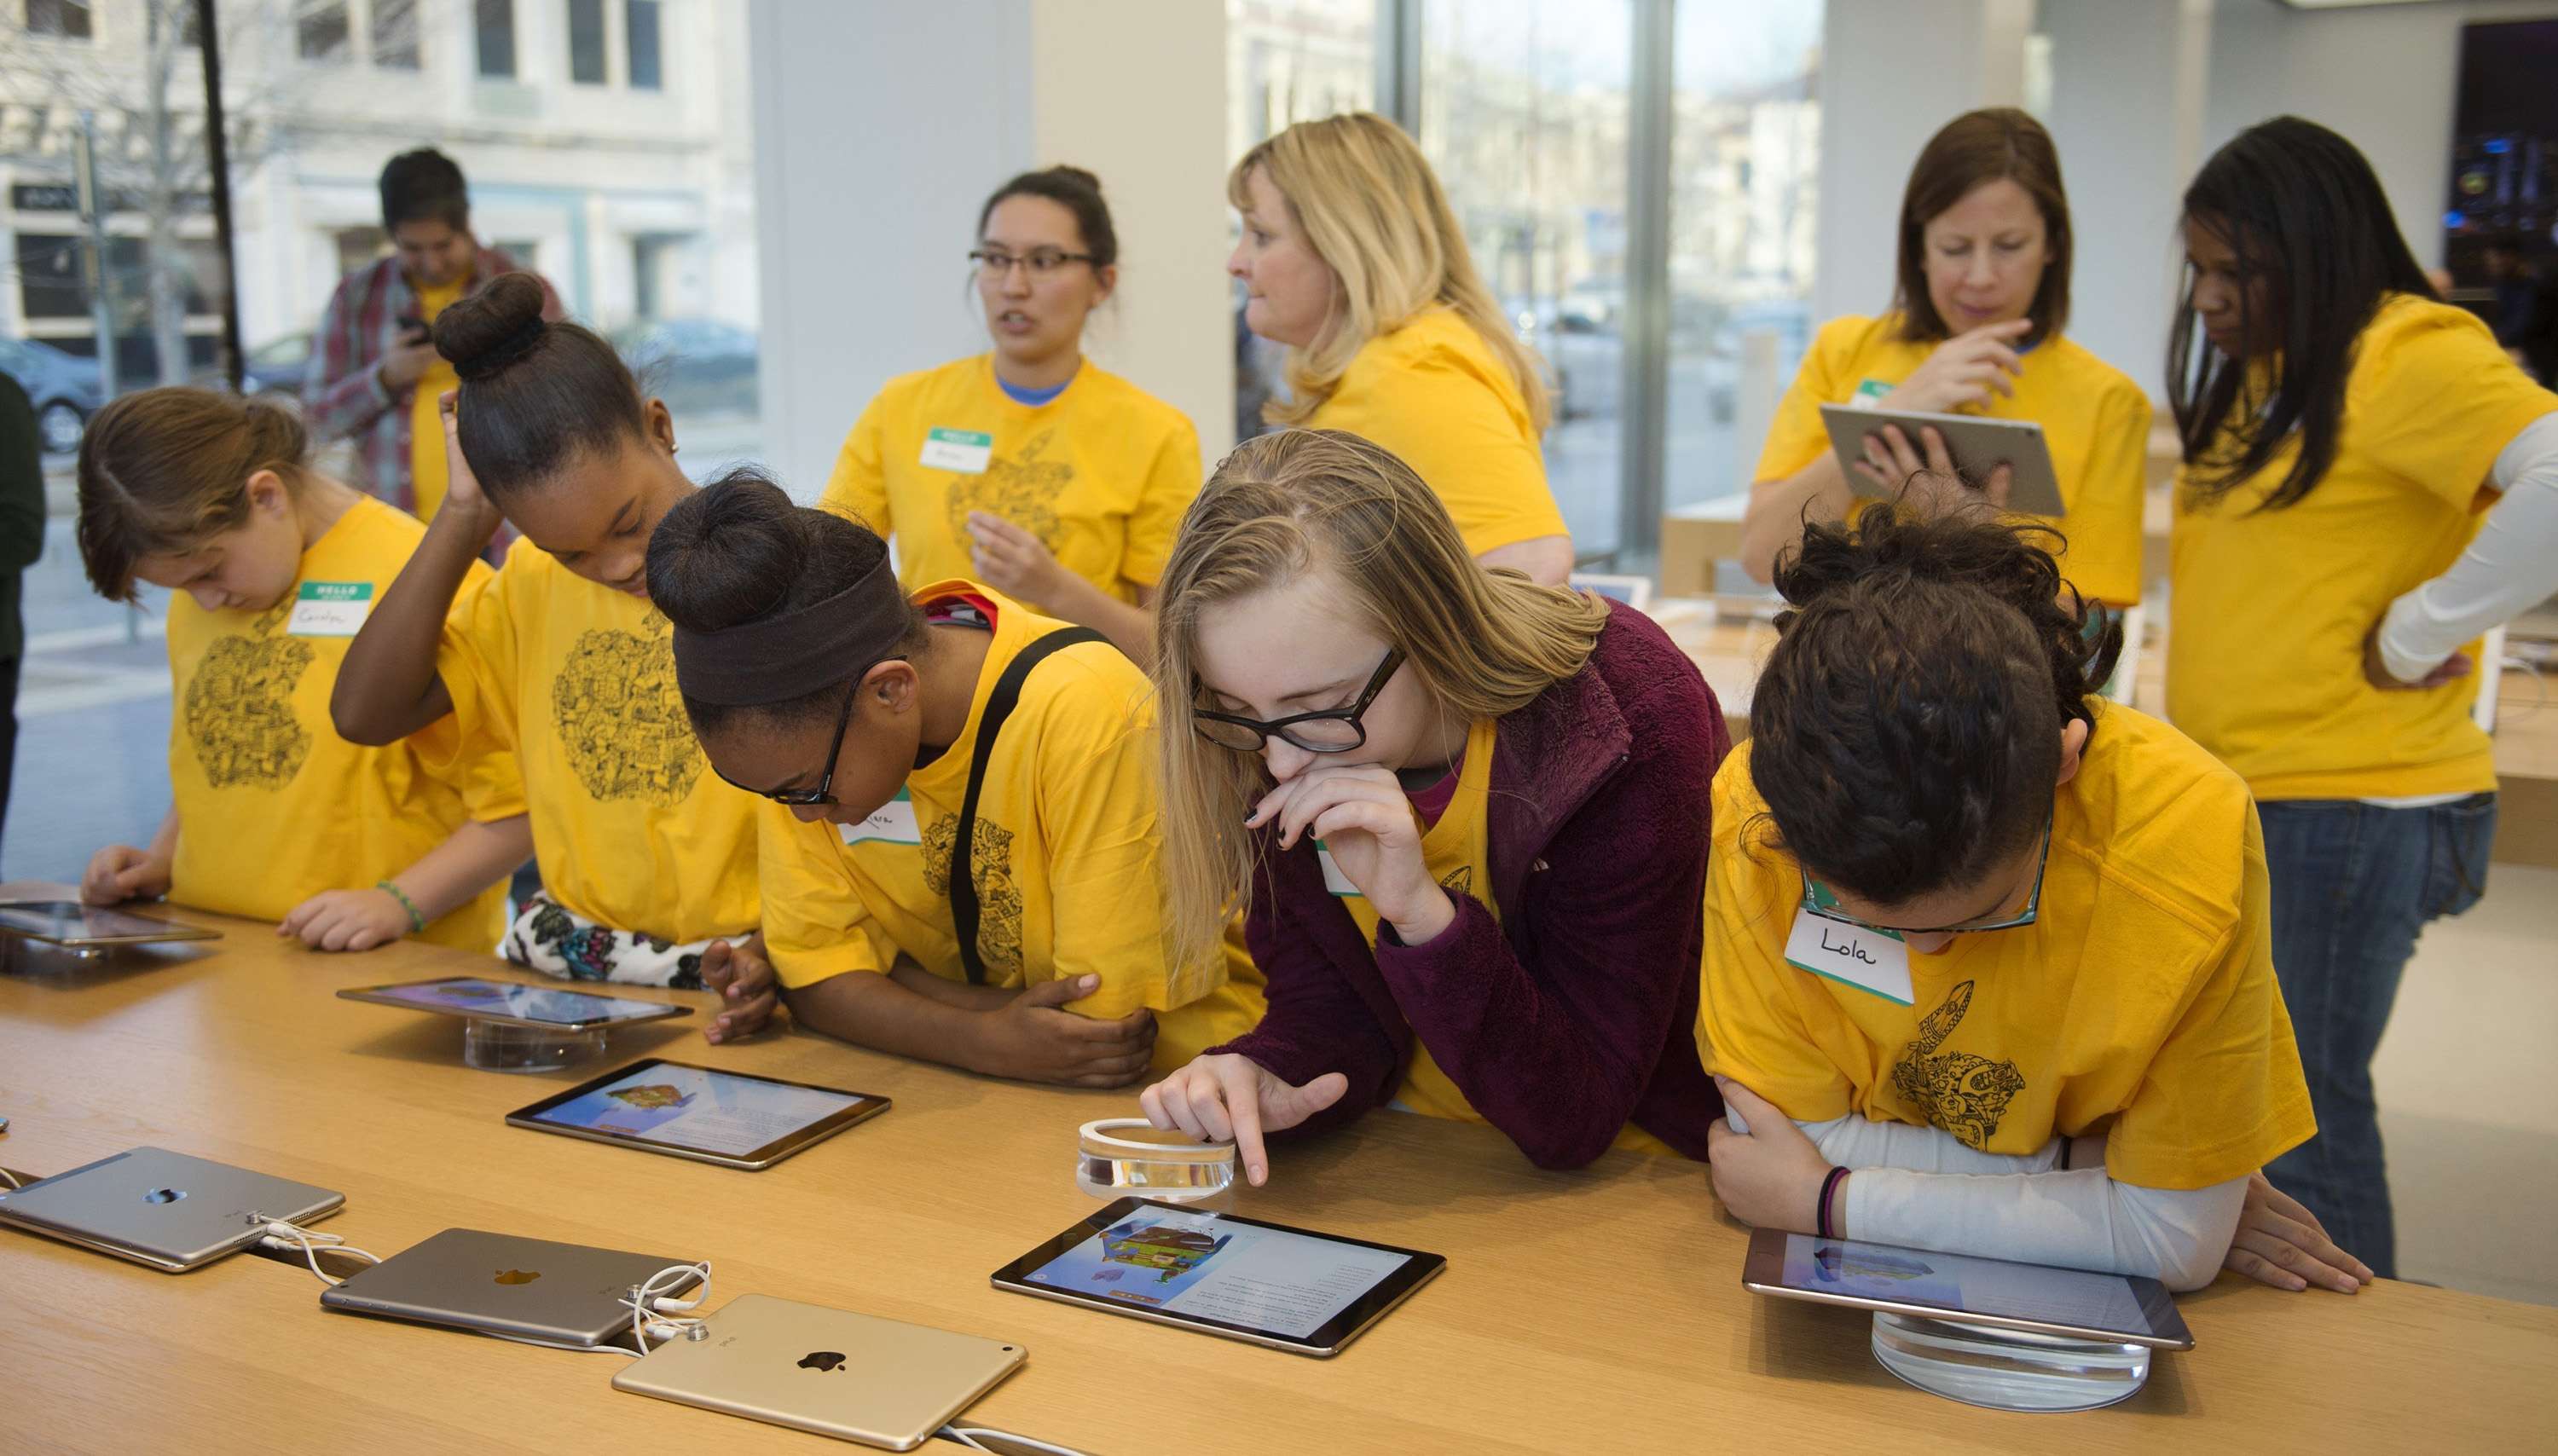 Members of the Kansas City Girls Who Code club complete a lesson on computer coding on iPads at the Apple store in the city. Photo: Kansas City Star/TNS